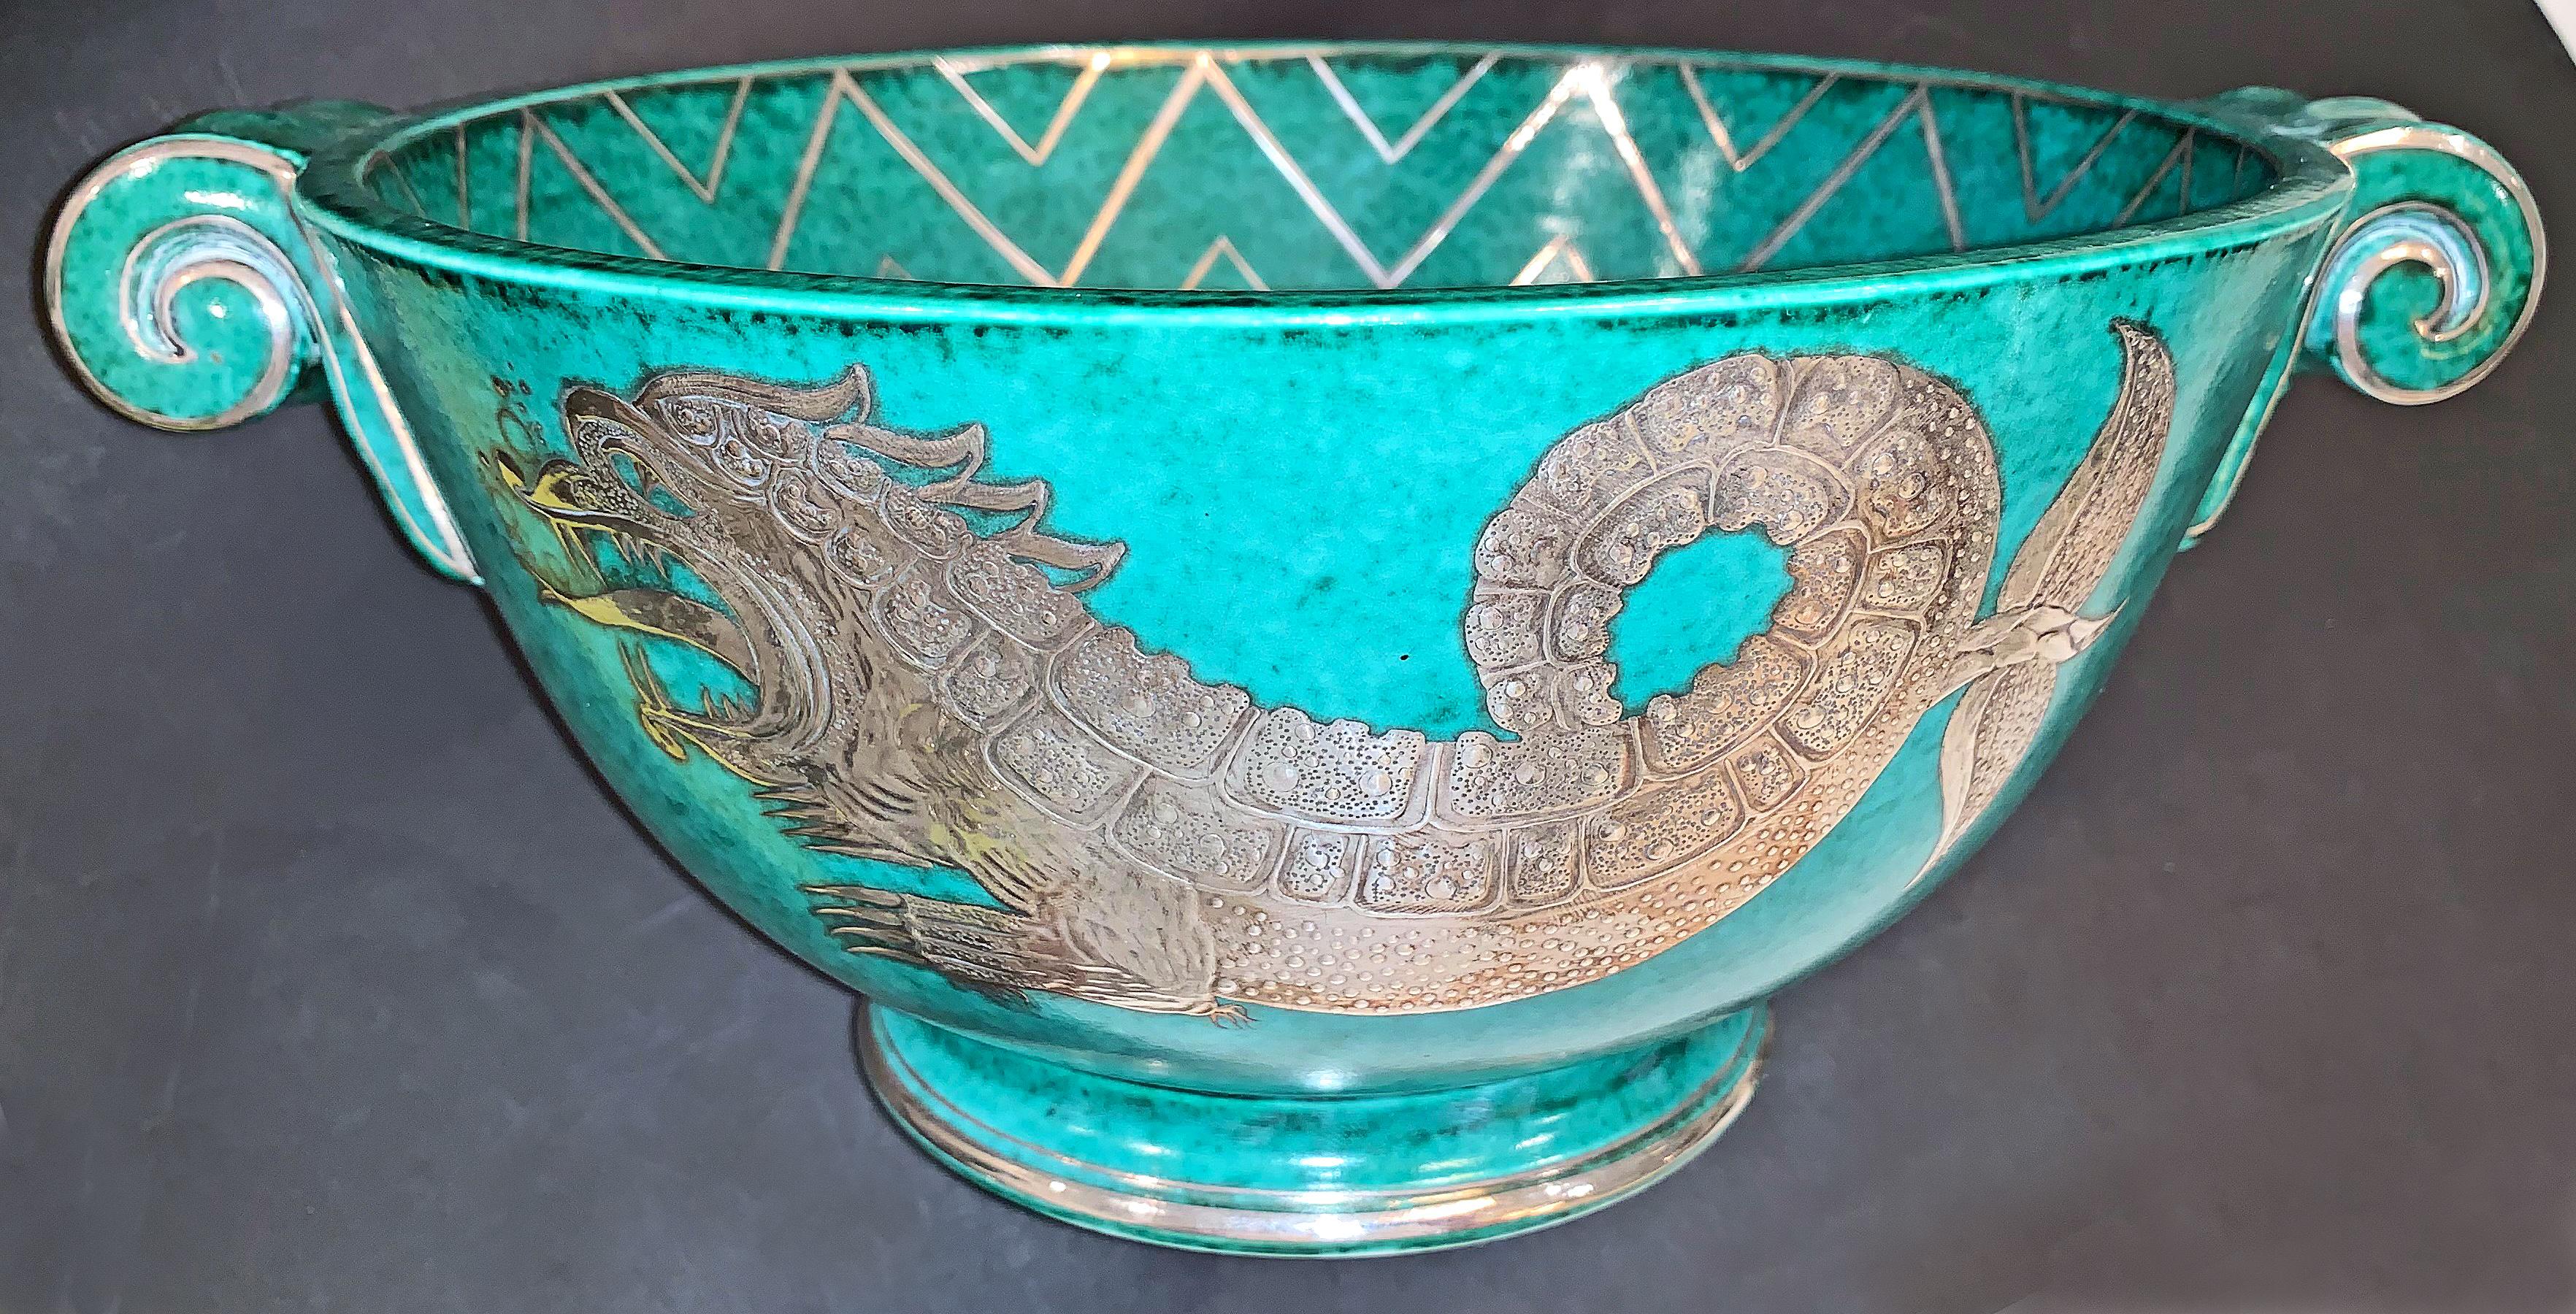 Stunning and gorgeous, and the only example we have seen, this Art Deco porcelain bowl -- glazed in a blue-green hue and finished with carved, silver overlay -- depicts a fantastic sea dragon on the exterior, and is finished with an elaborate,